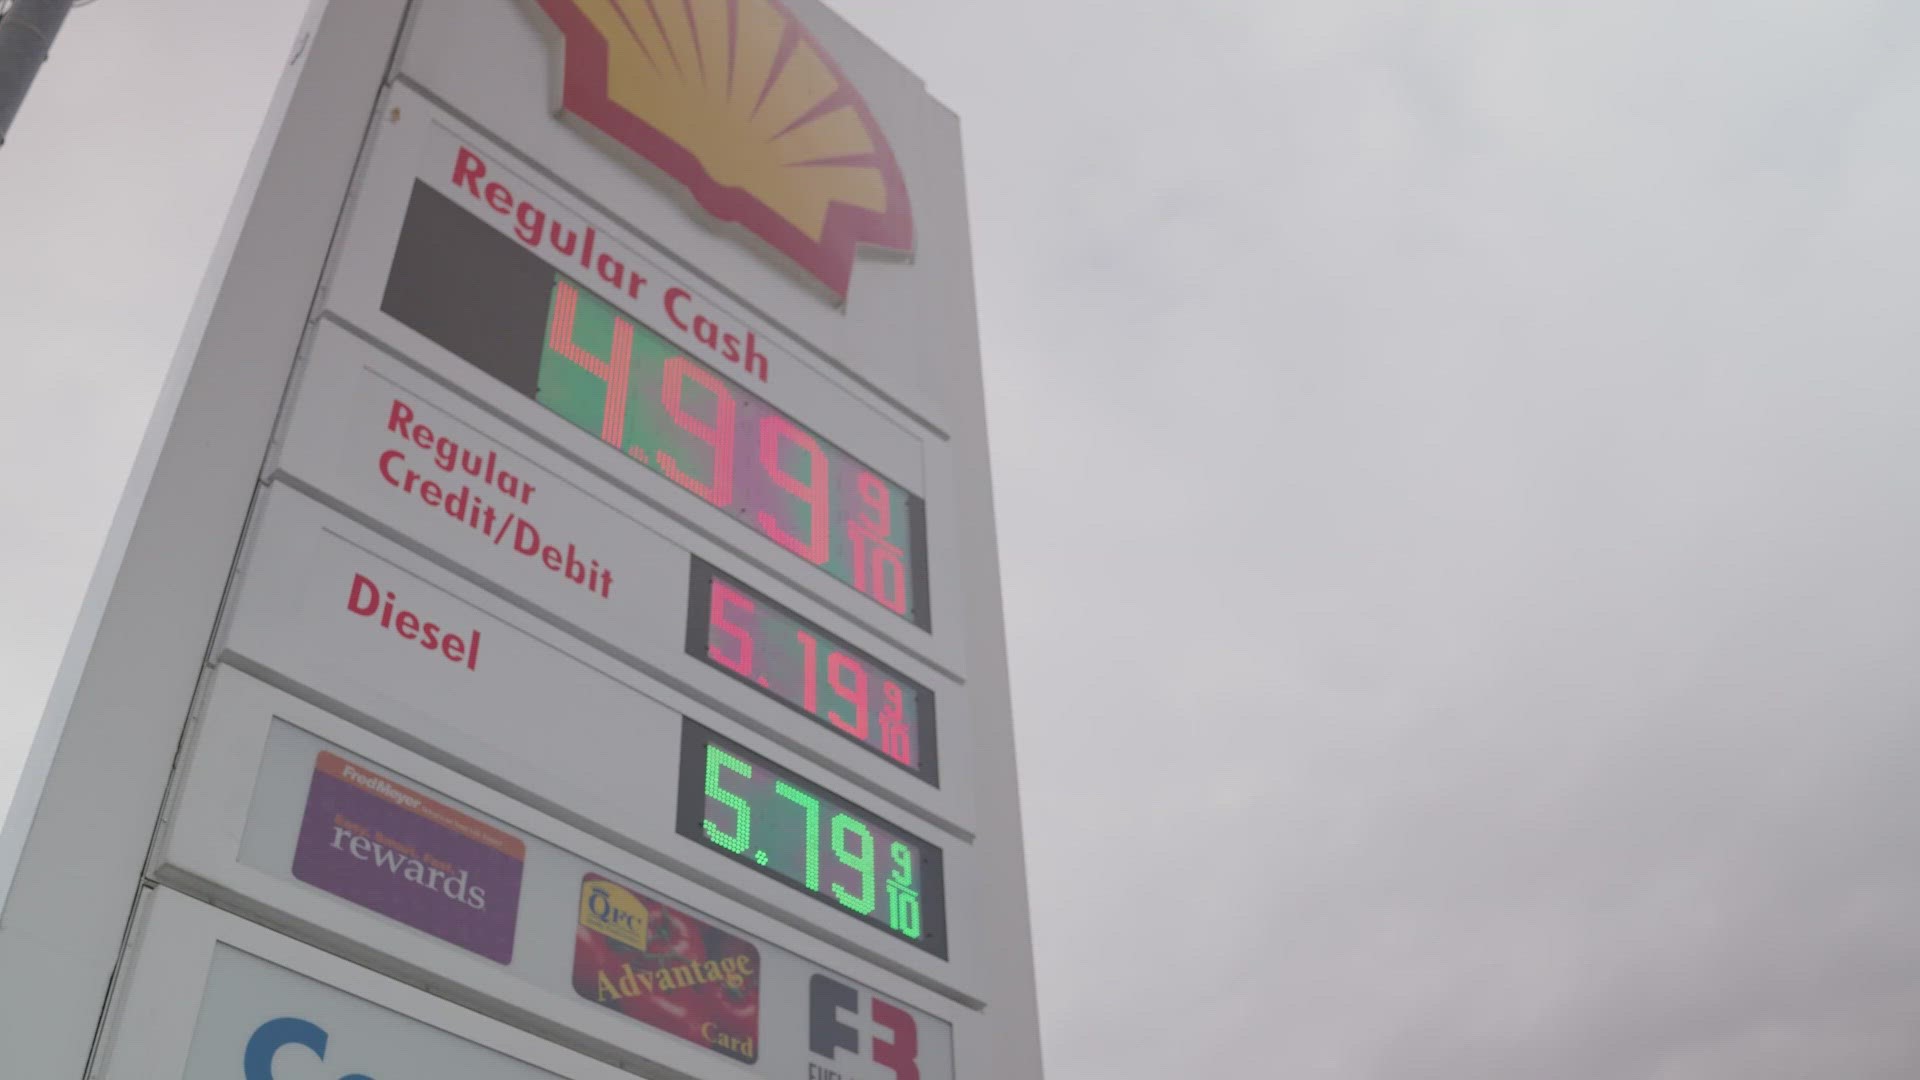 A former WSDOT economist is accusing state leaders of retaliation when he refused to lie about gas prices.